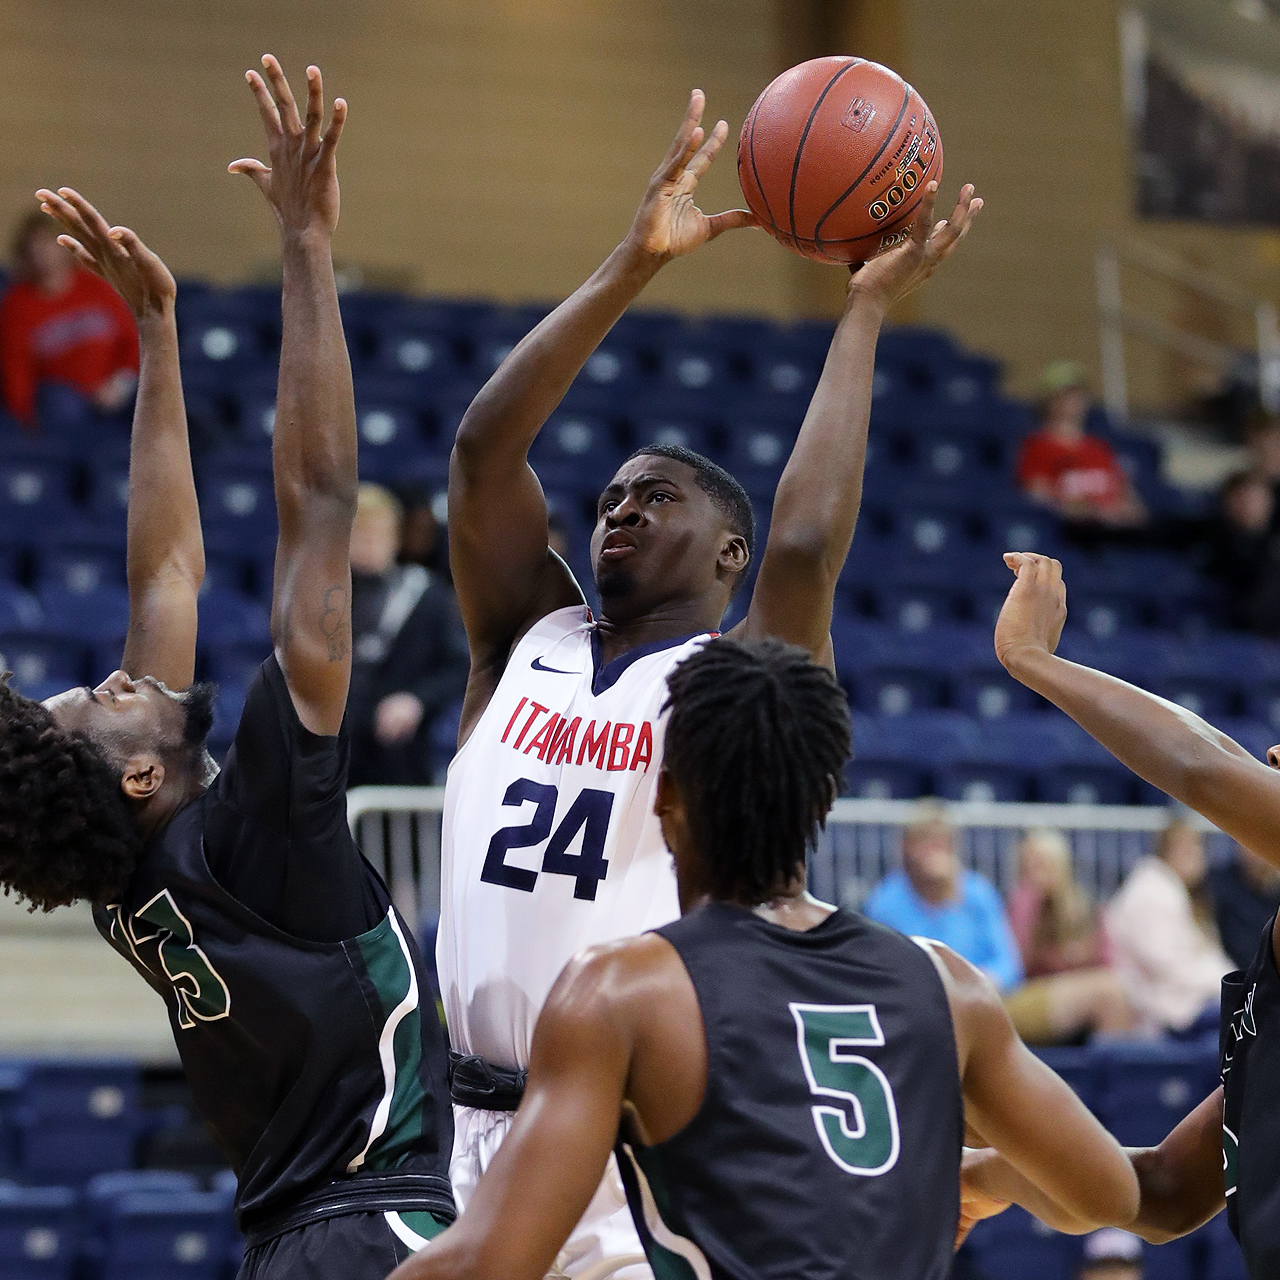 Indians drop heart-breaker with East Mississippi, 68-64